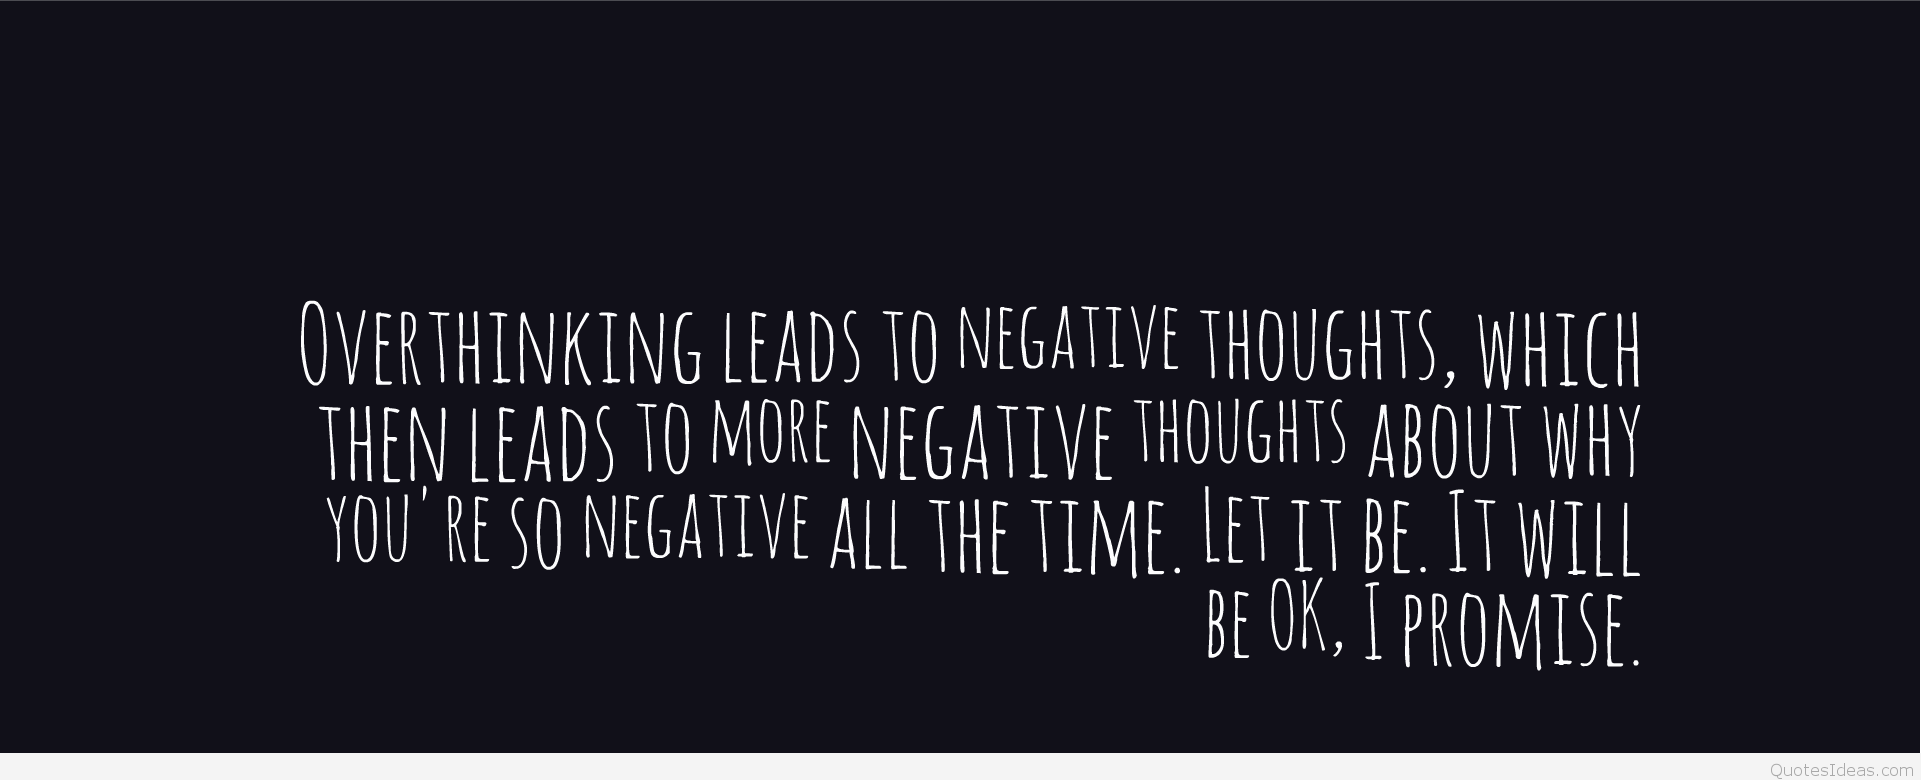 Negative Thoughts Quotes image with wallpaper hd